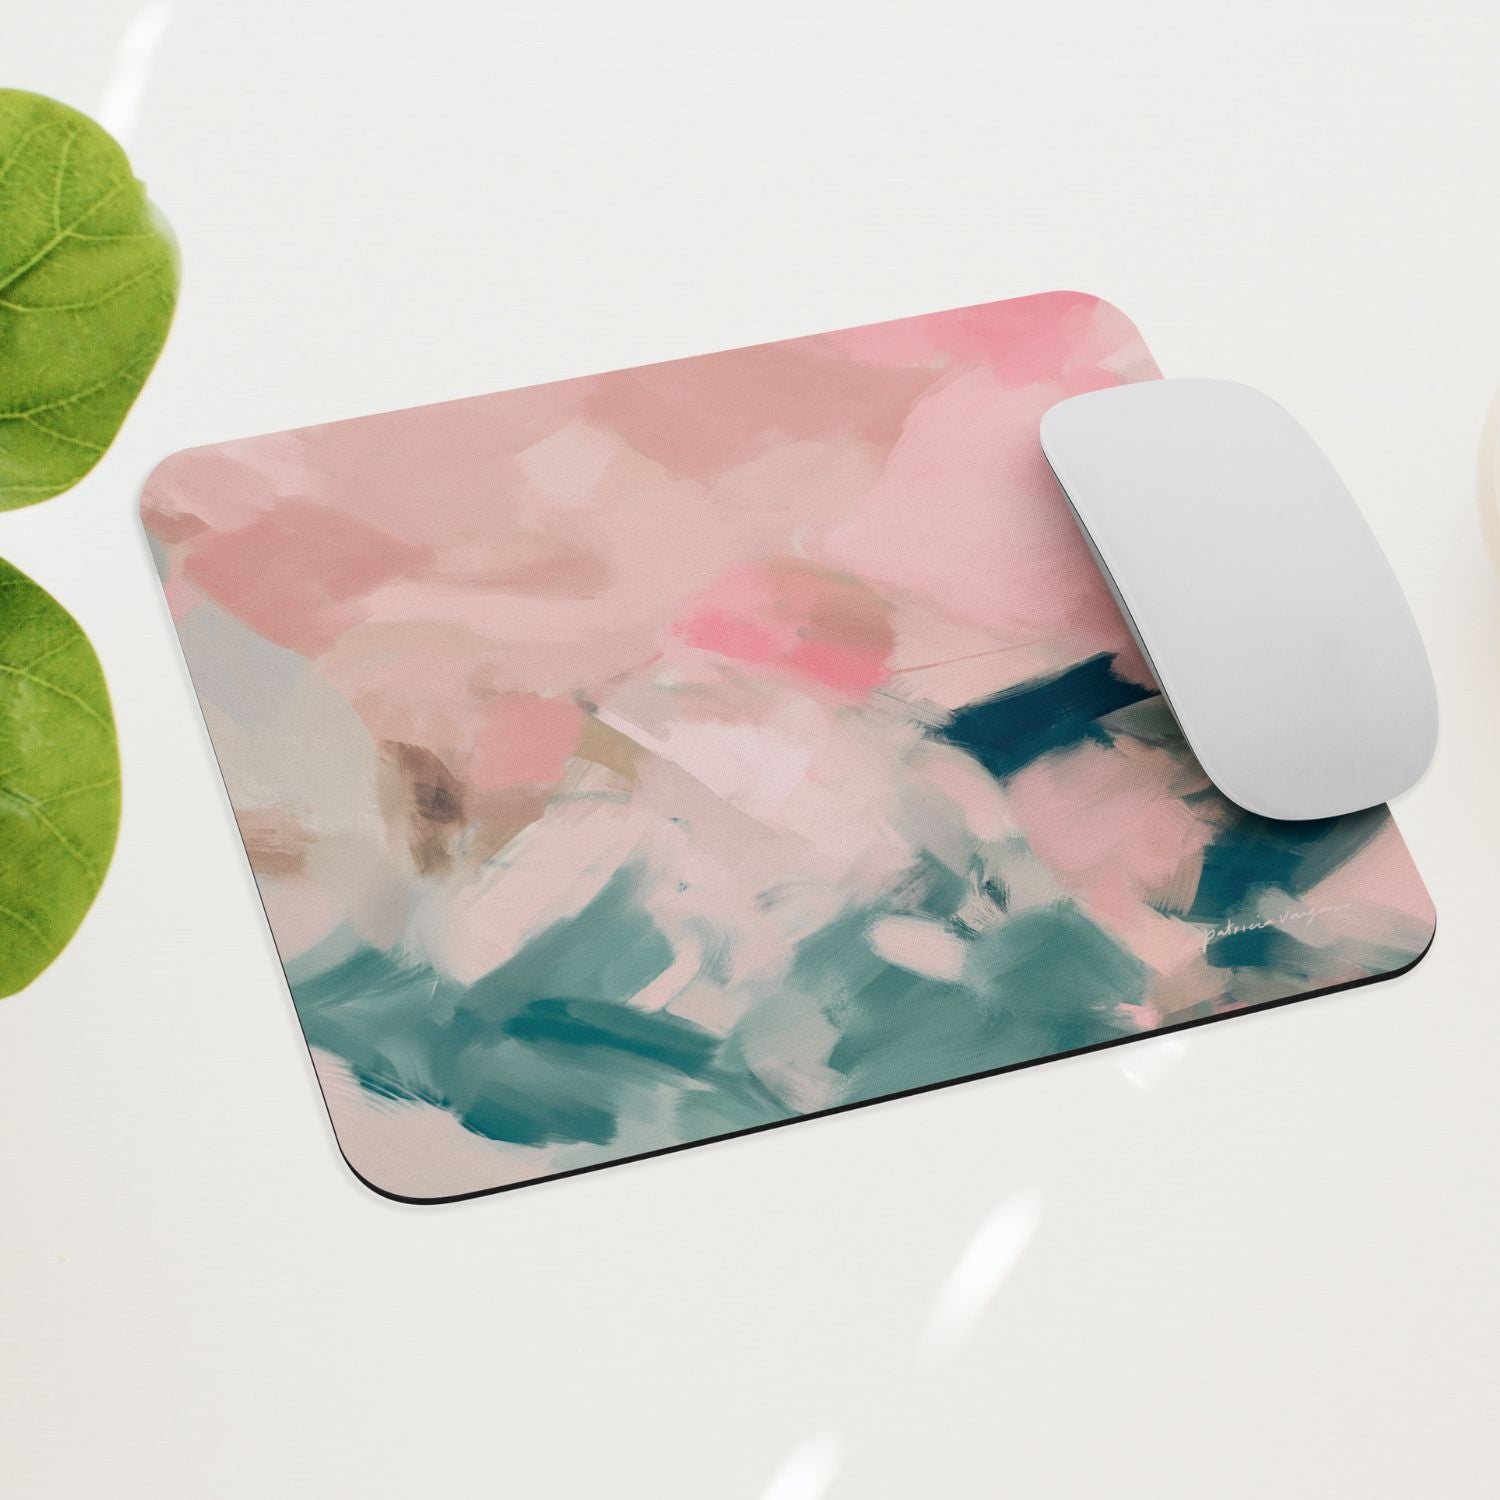 Flamingo, pink and green mouse pad for styling your office desk. Featuring artwork by Parima Studio. Home office styling accessories, cubicle styling accessories.